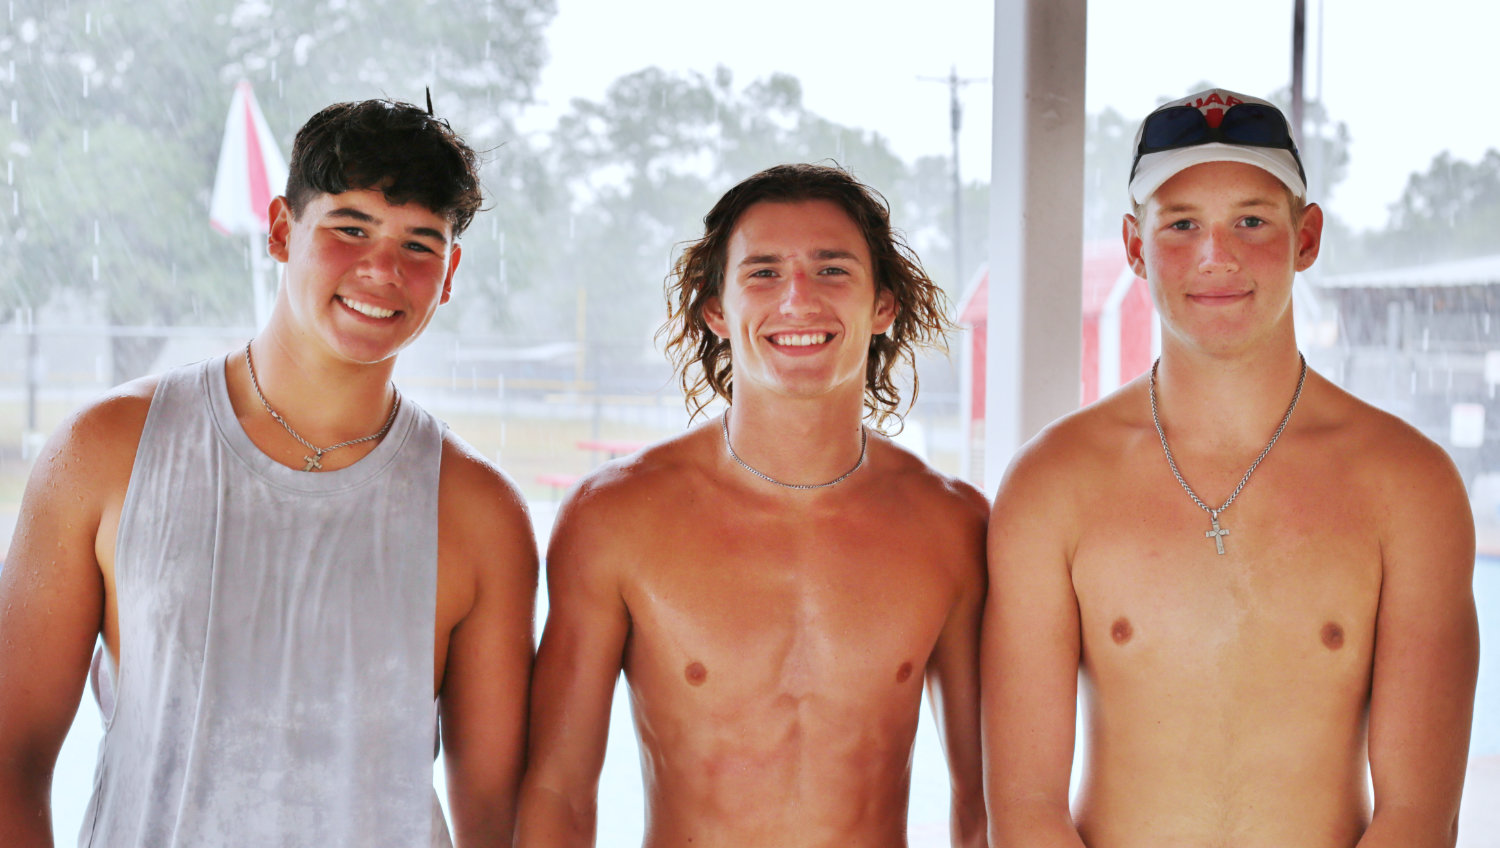 Three of the Quitman City Pool lifeguards, from left, Tristan Eley, Adam Blalock and Nicholas Eley, take cover while a localized downpour temporarily delayed pool activity on a recent Friday afternoon.